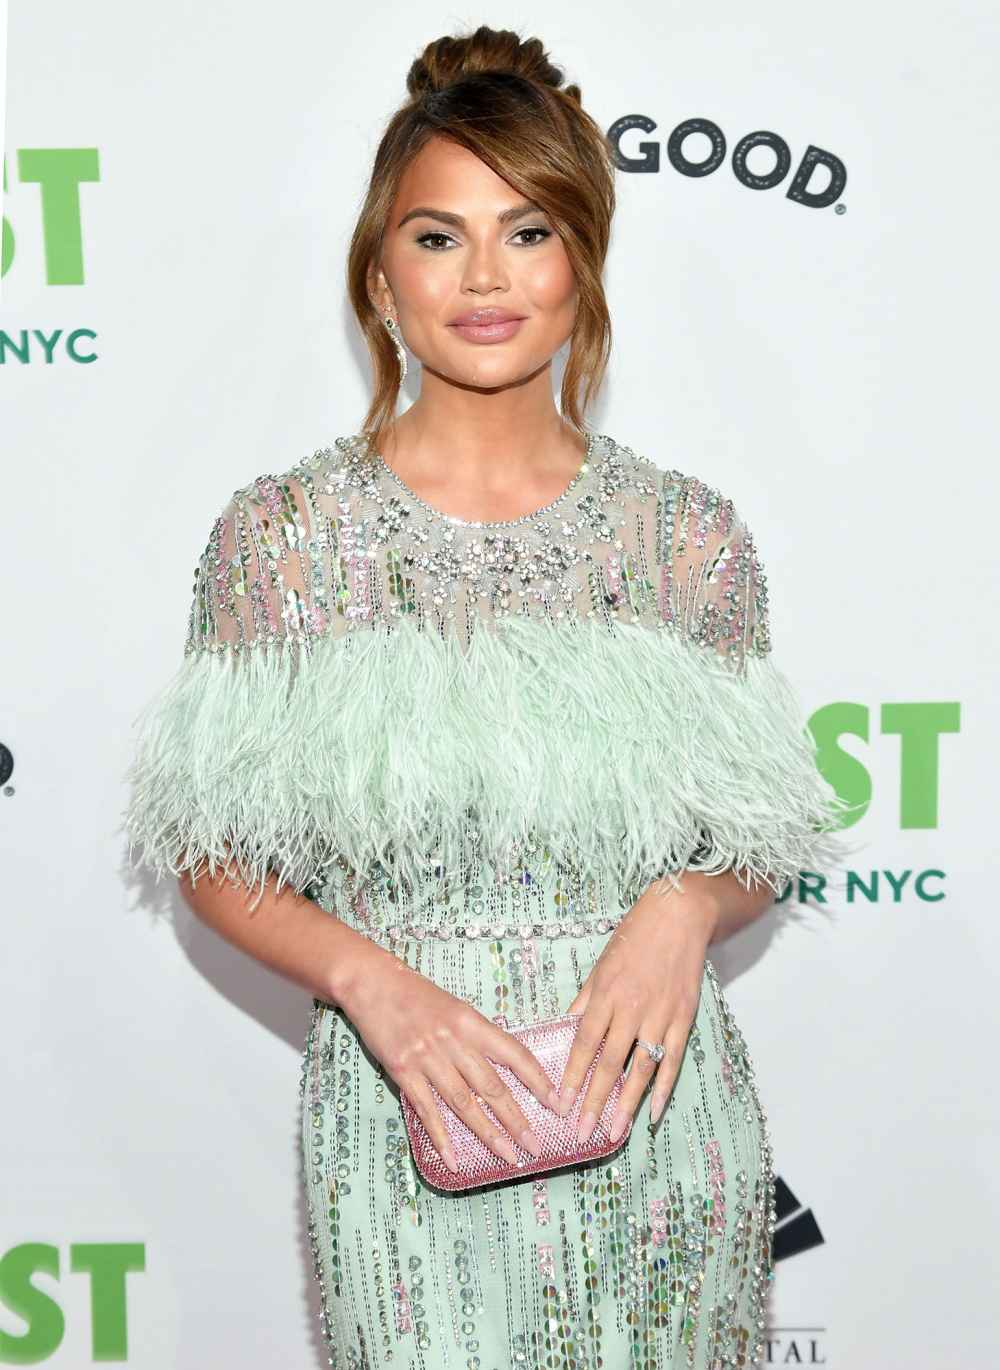 Chrissy Teigen Calls Out Fan Who Claims She Gets Constant Liposuction